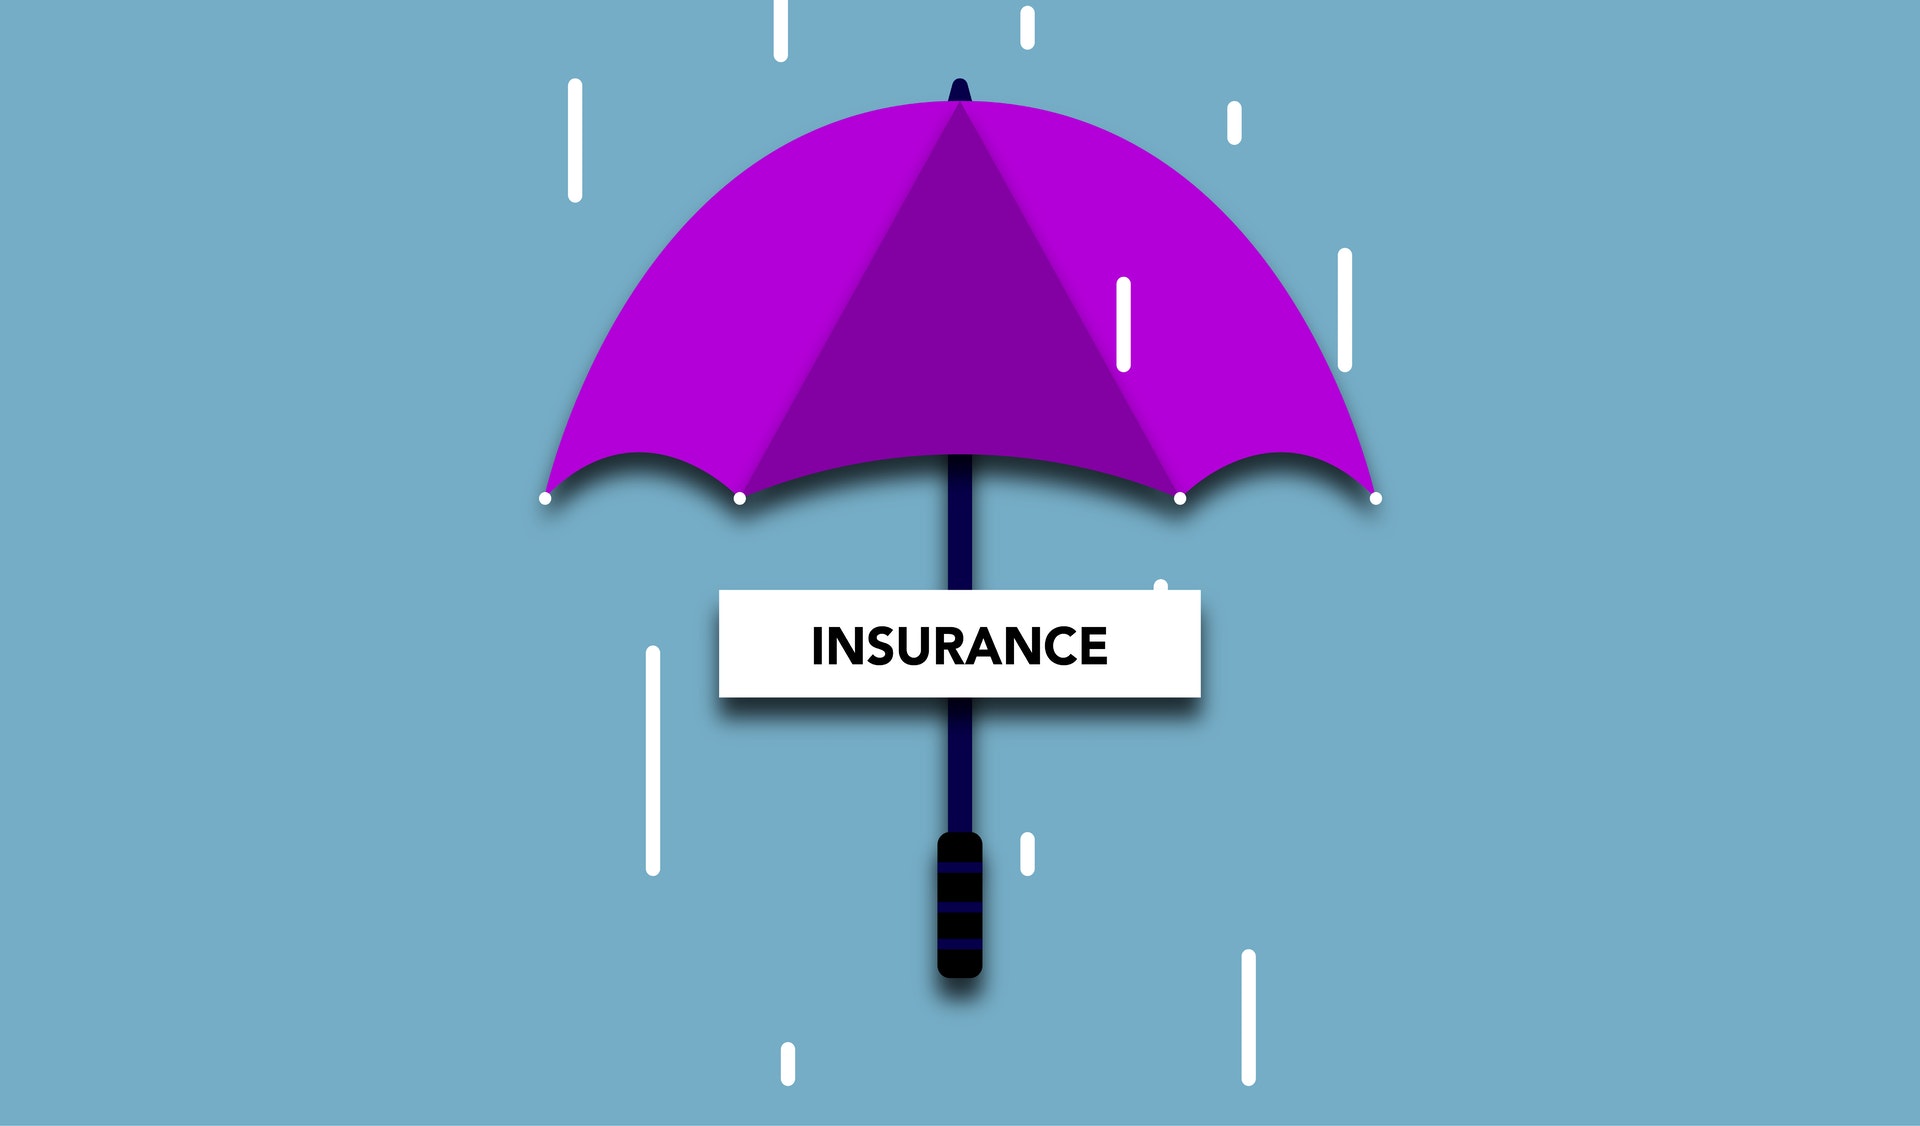 Is the price of public liability insurance worth it?